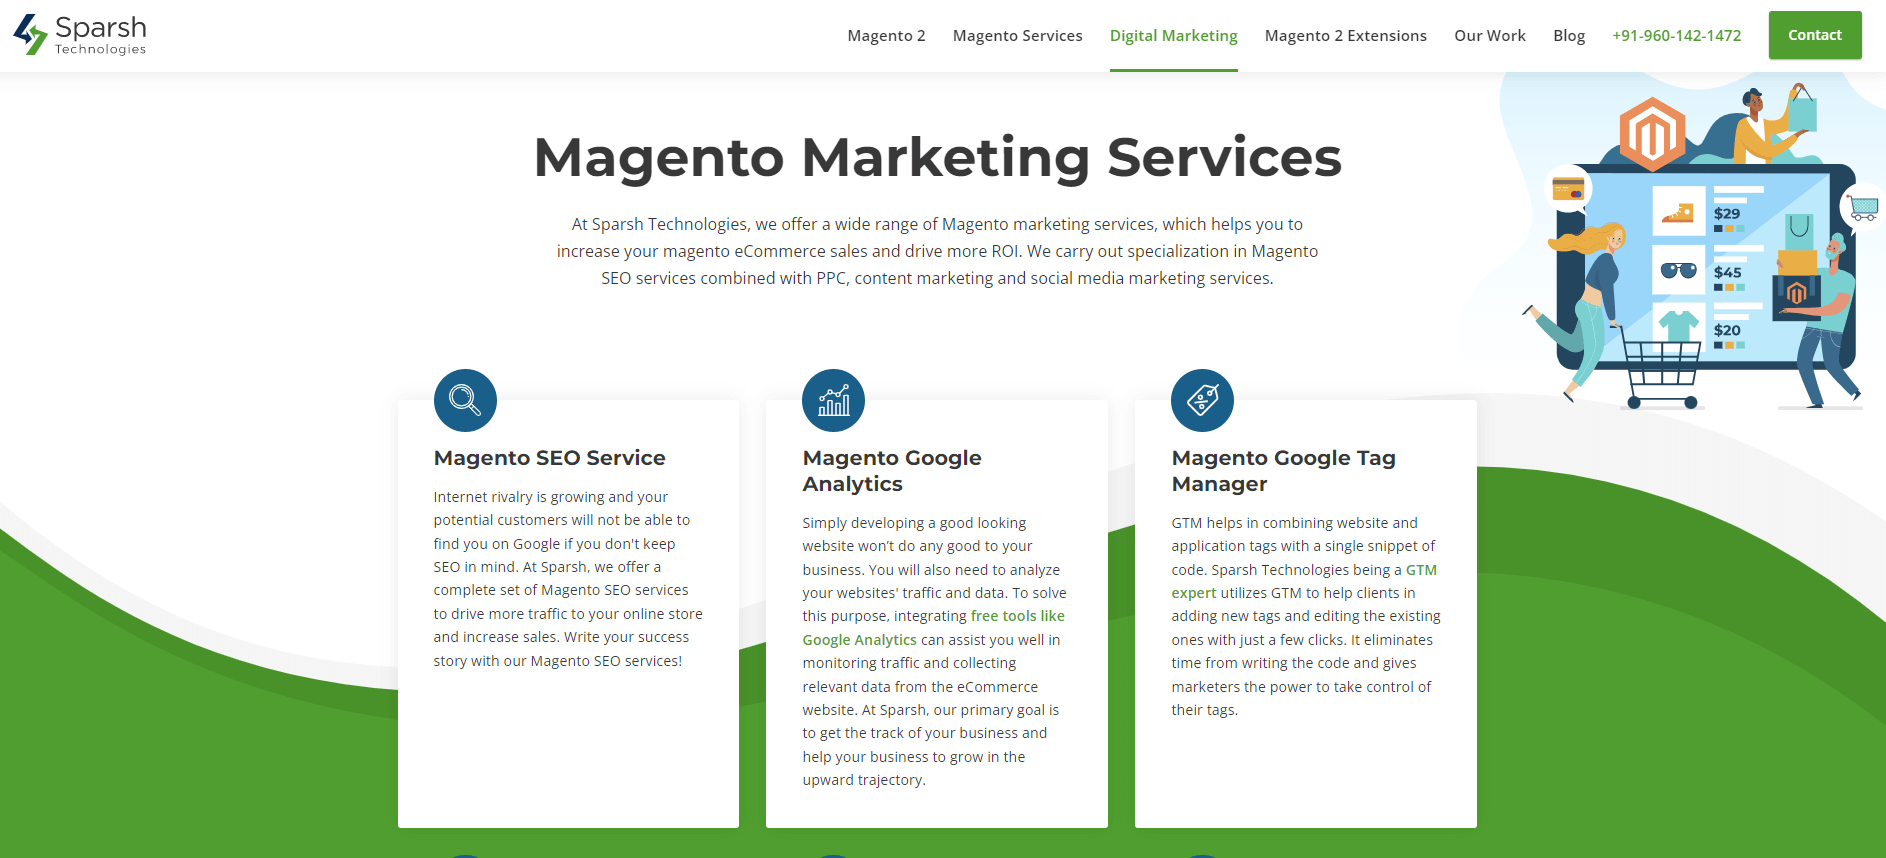 Magento SEO services by Sparsh Technologies